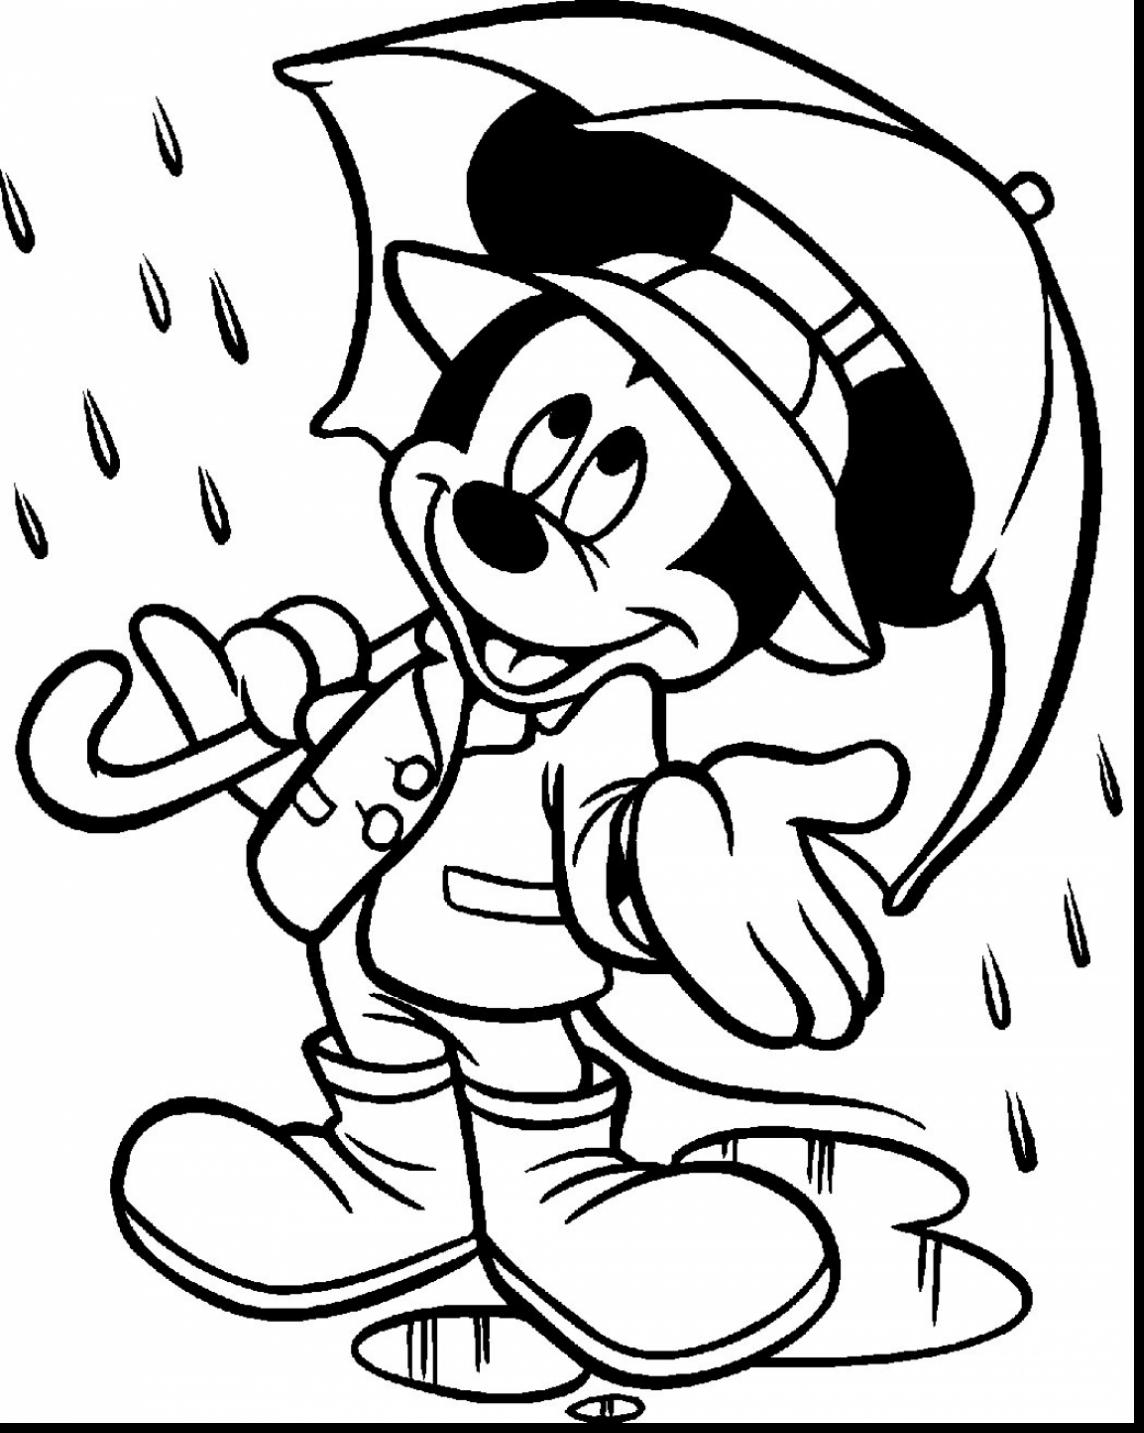 Mickey And Minnie Coloring Pages To Print Coloring Ideas Free Printable Mickey Mouse Clubhouse Coloring